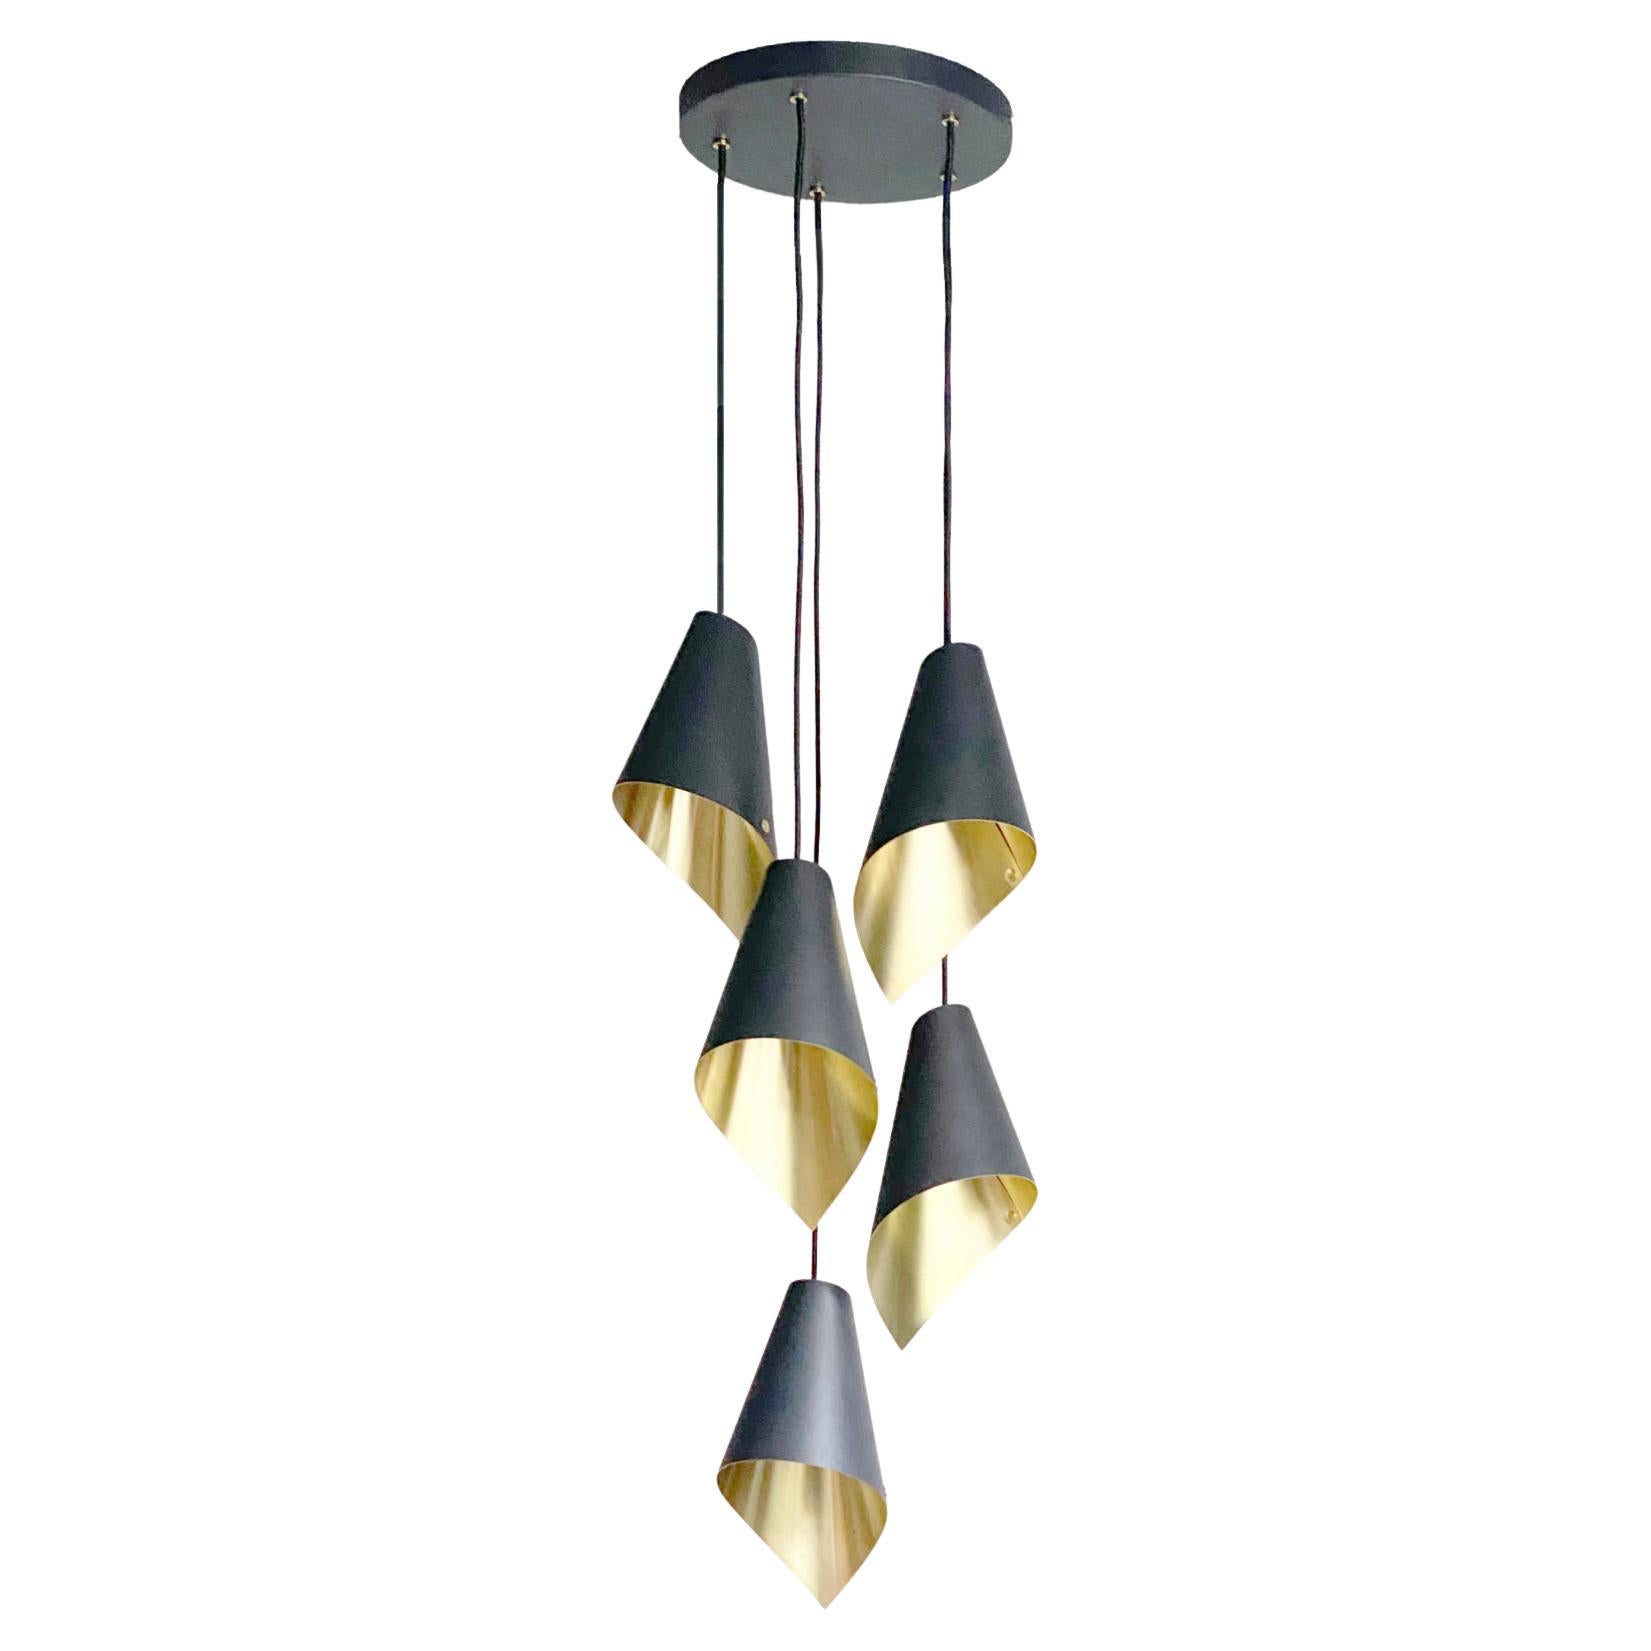 ARC 5 Ceiling Light Pendant in Black and Brushed Brass, Made in Britain